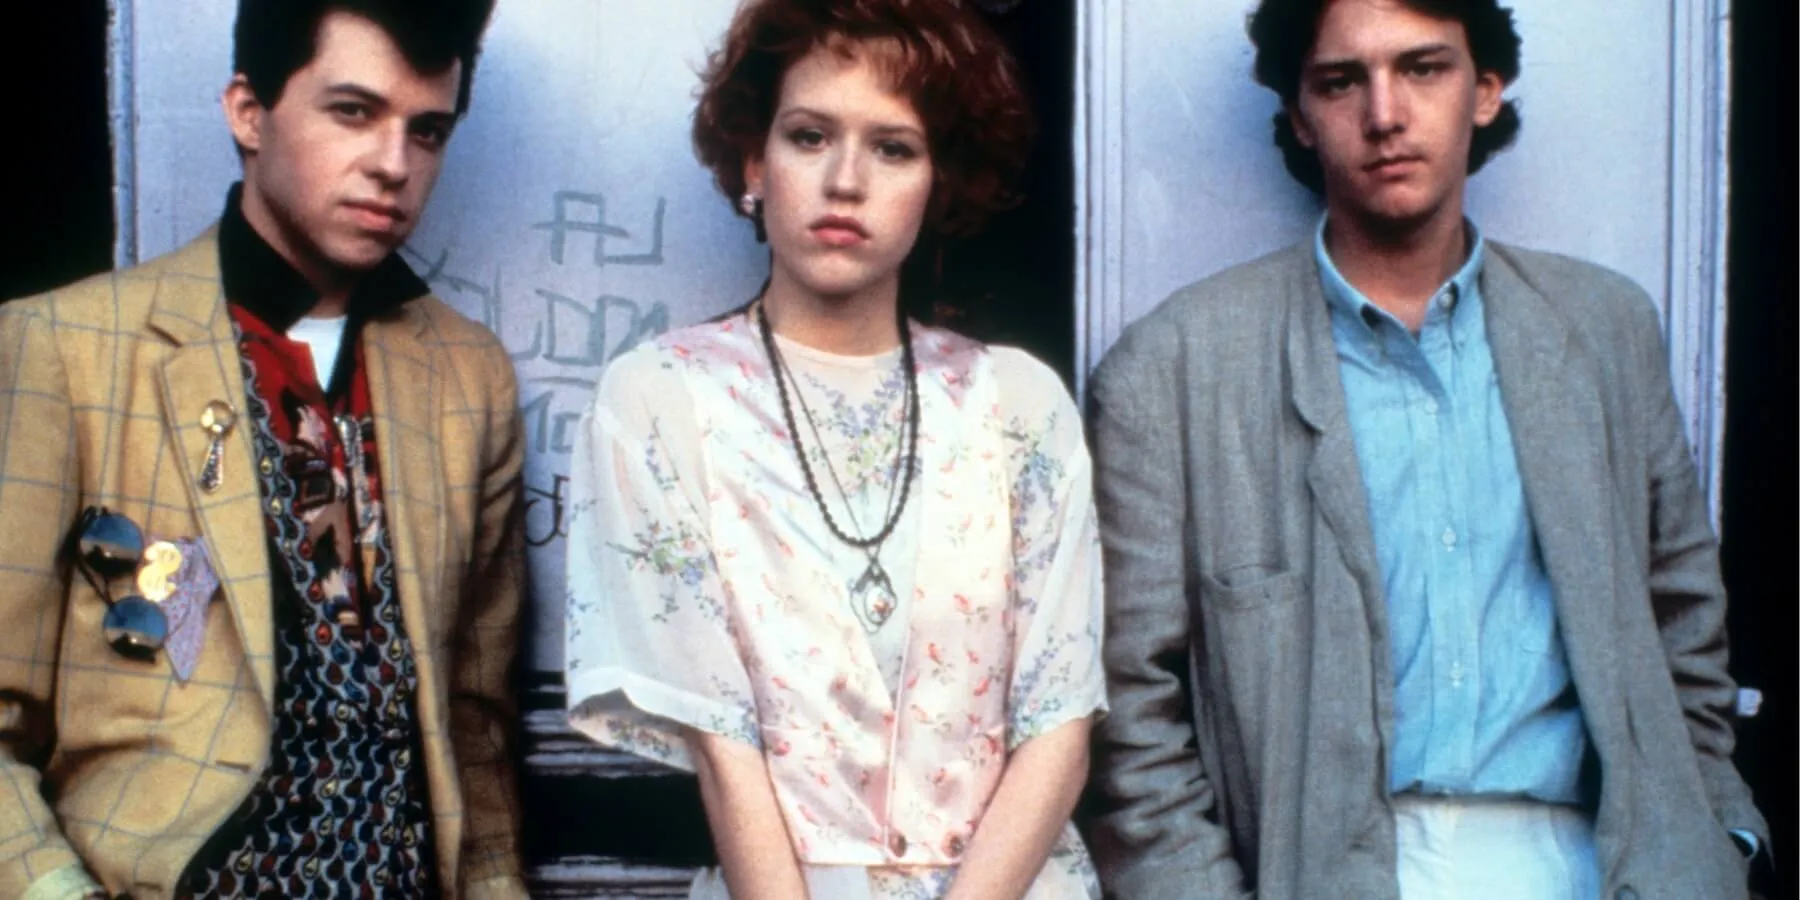 Jon Cryer, Molly Ringwald and Andrew McCarthy in the film 'Pretty in Pink.'